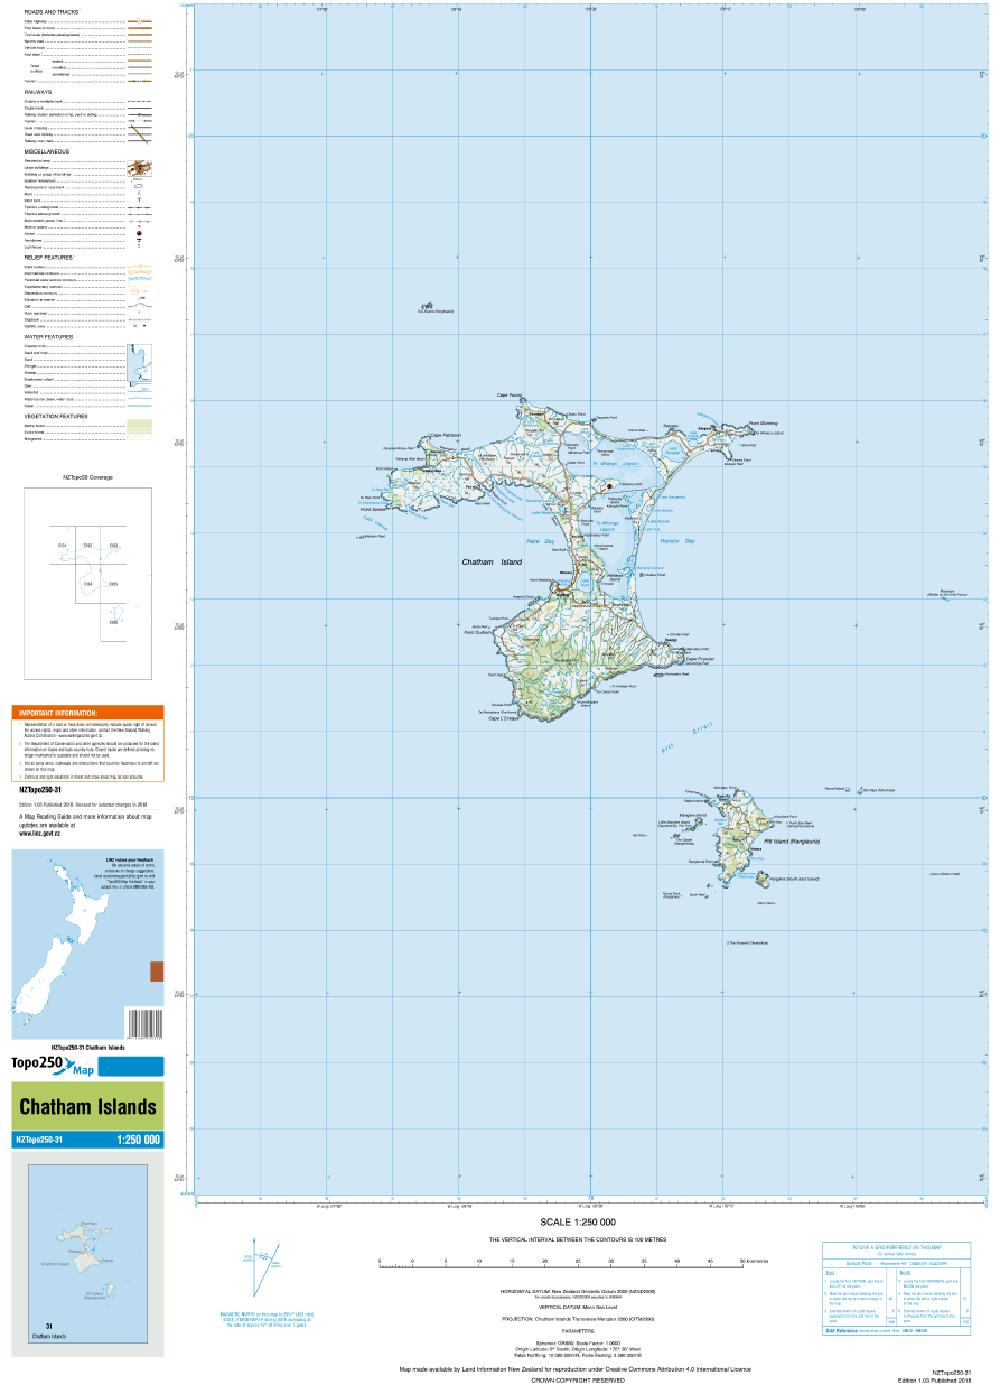 Topo map of Chatham Islands